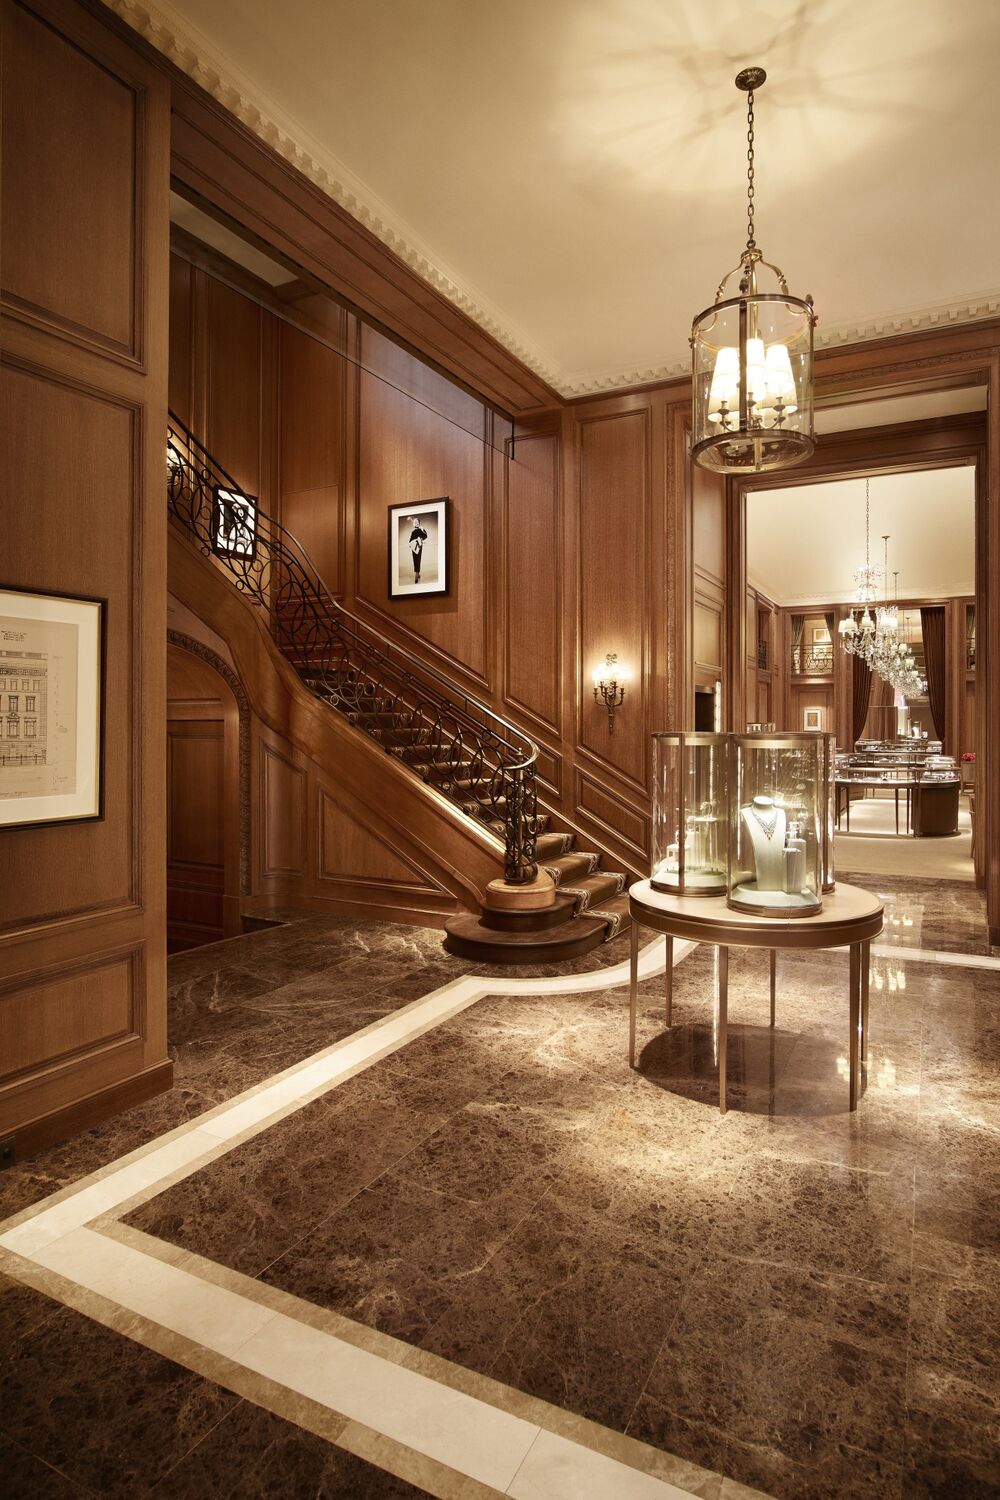 boutique cartier nyc fifth ave mansion